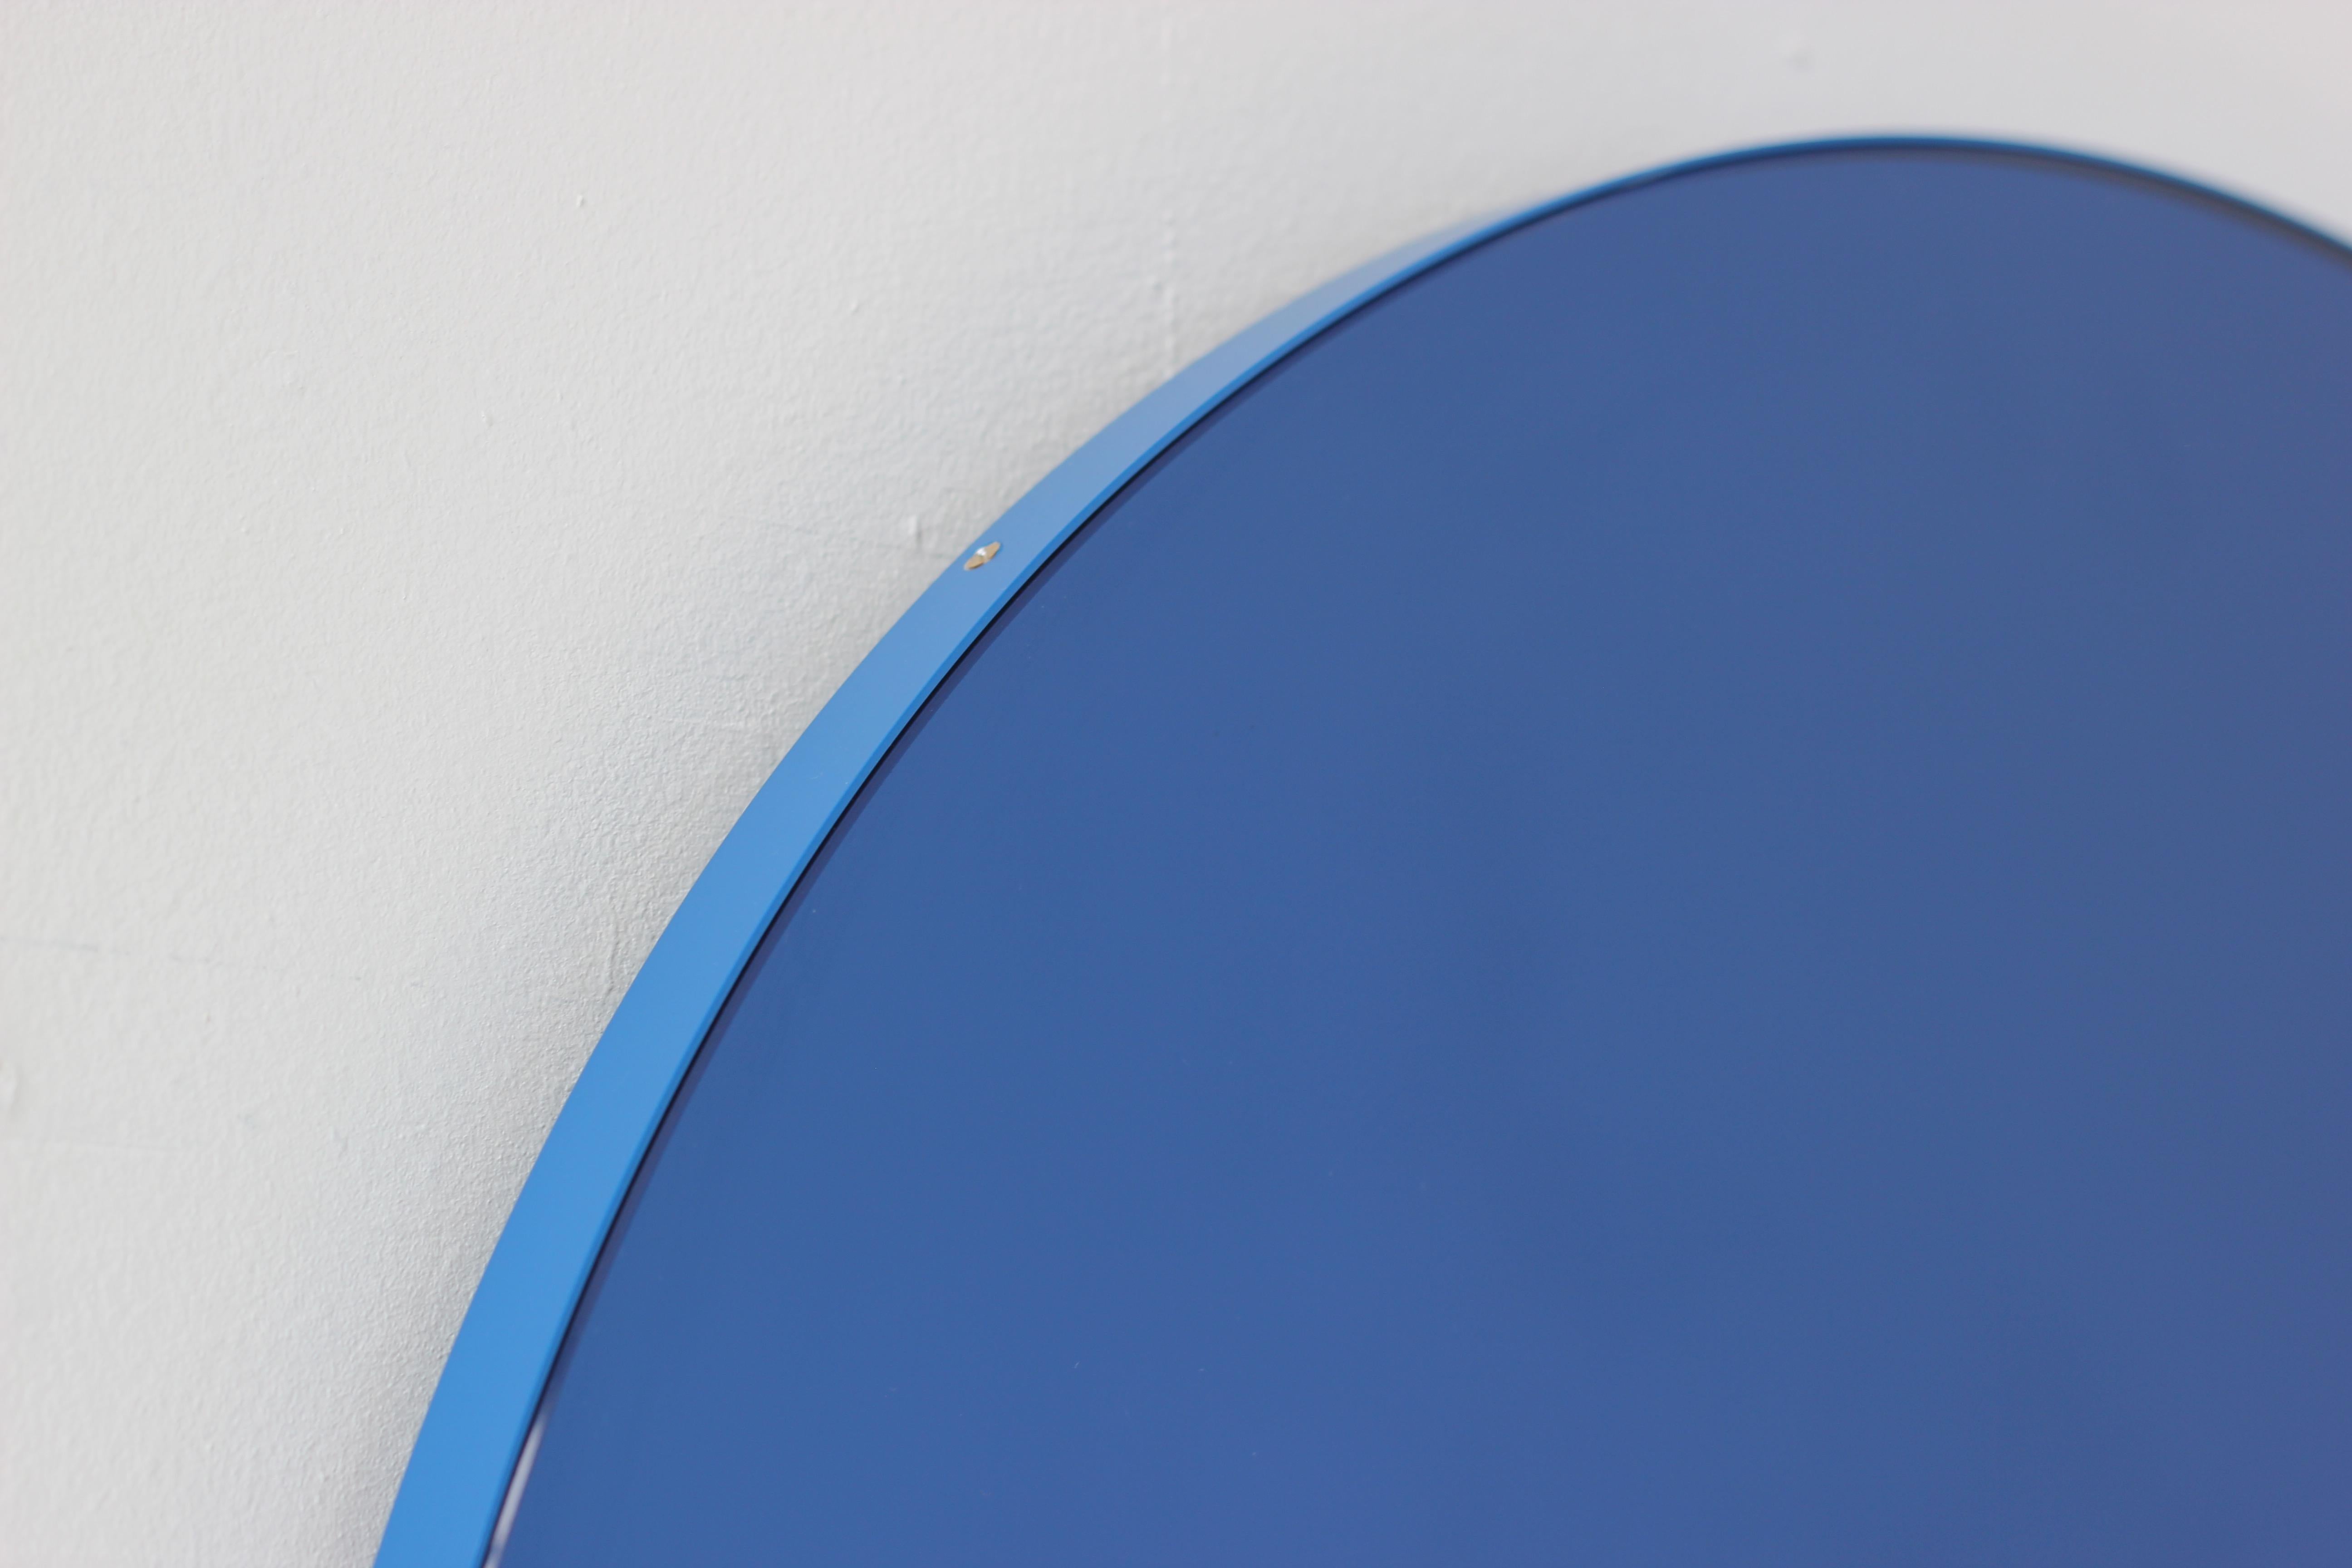 Powder-Coated Orbis Blue Tinted Round Mirror with a Modern Blue Frame, Small For Sale